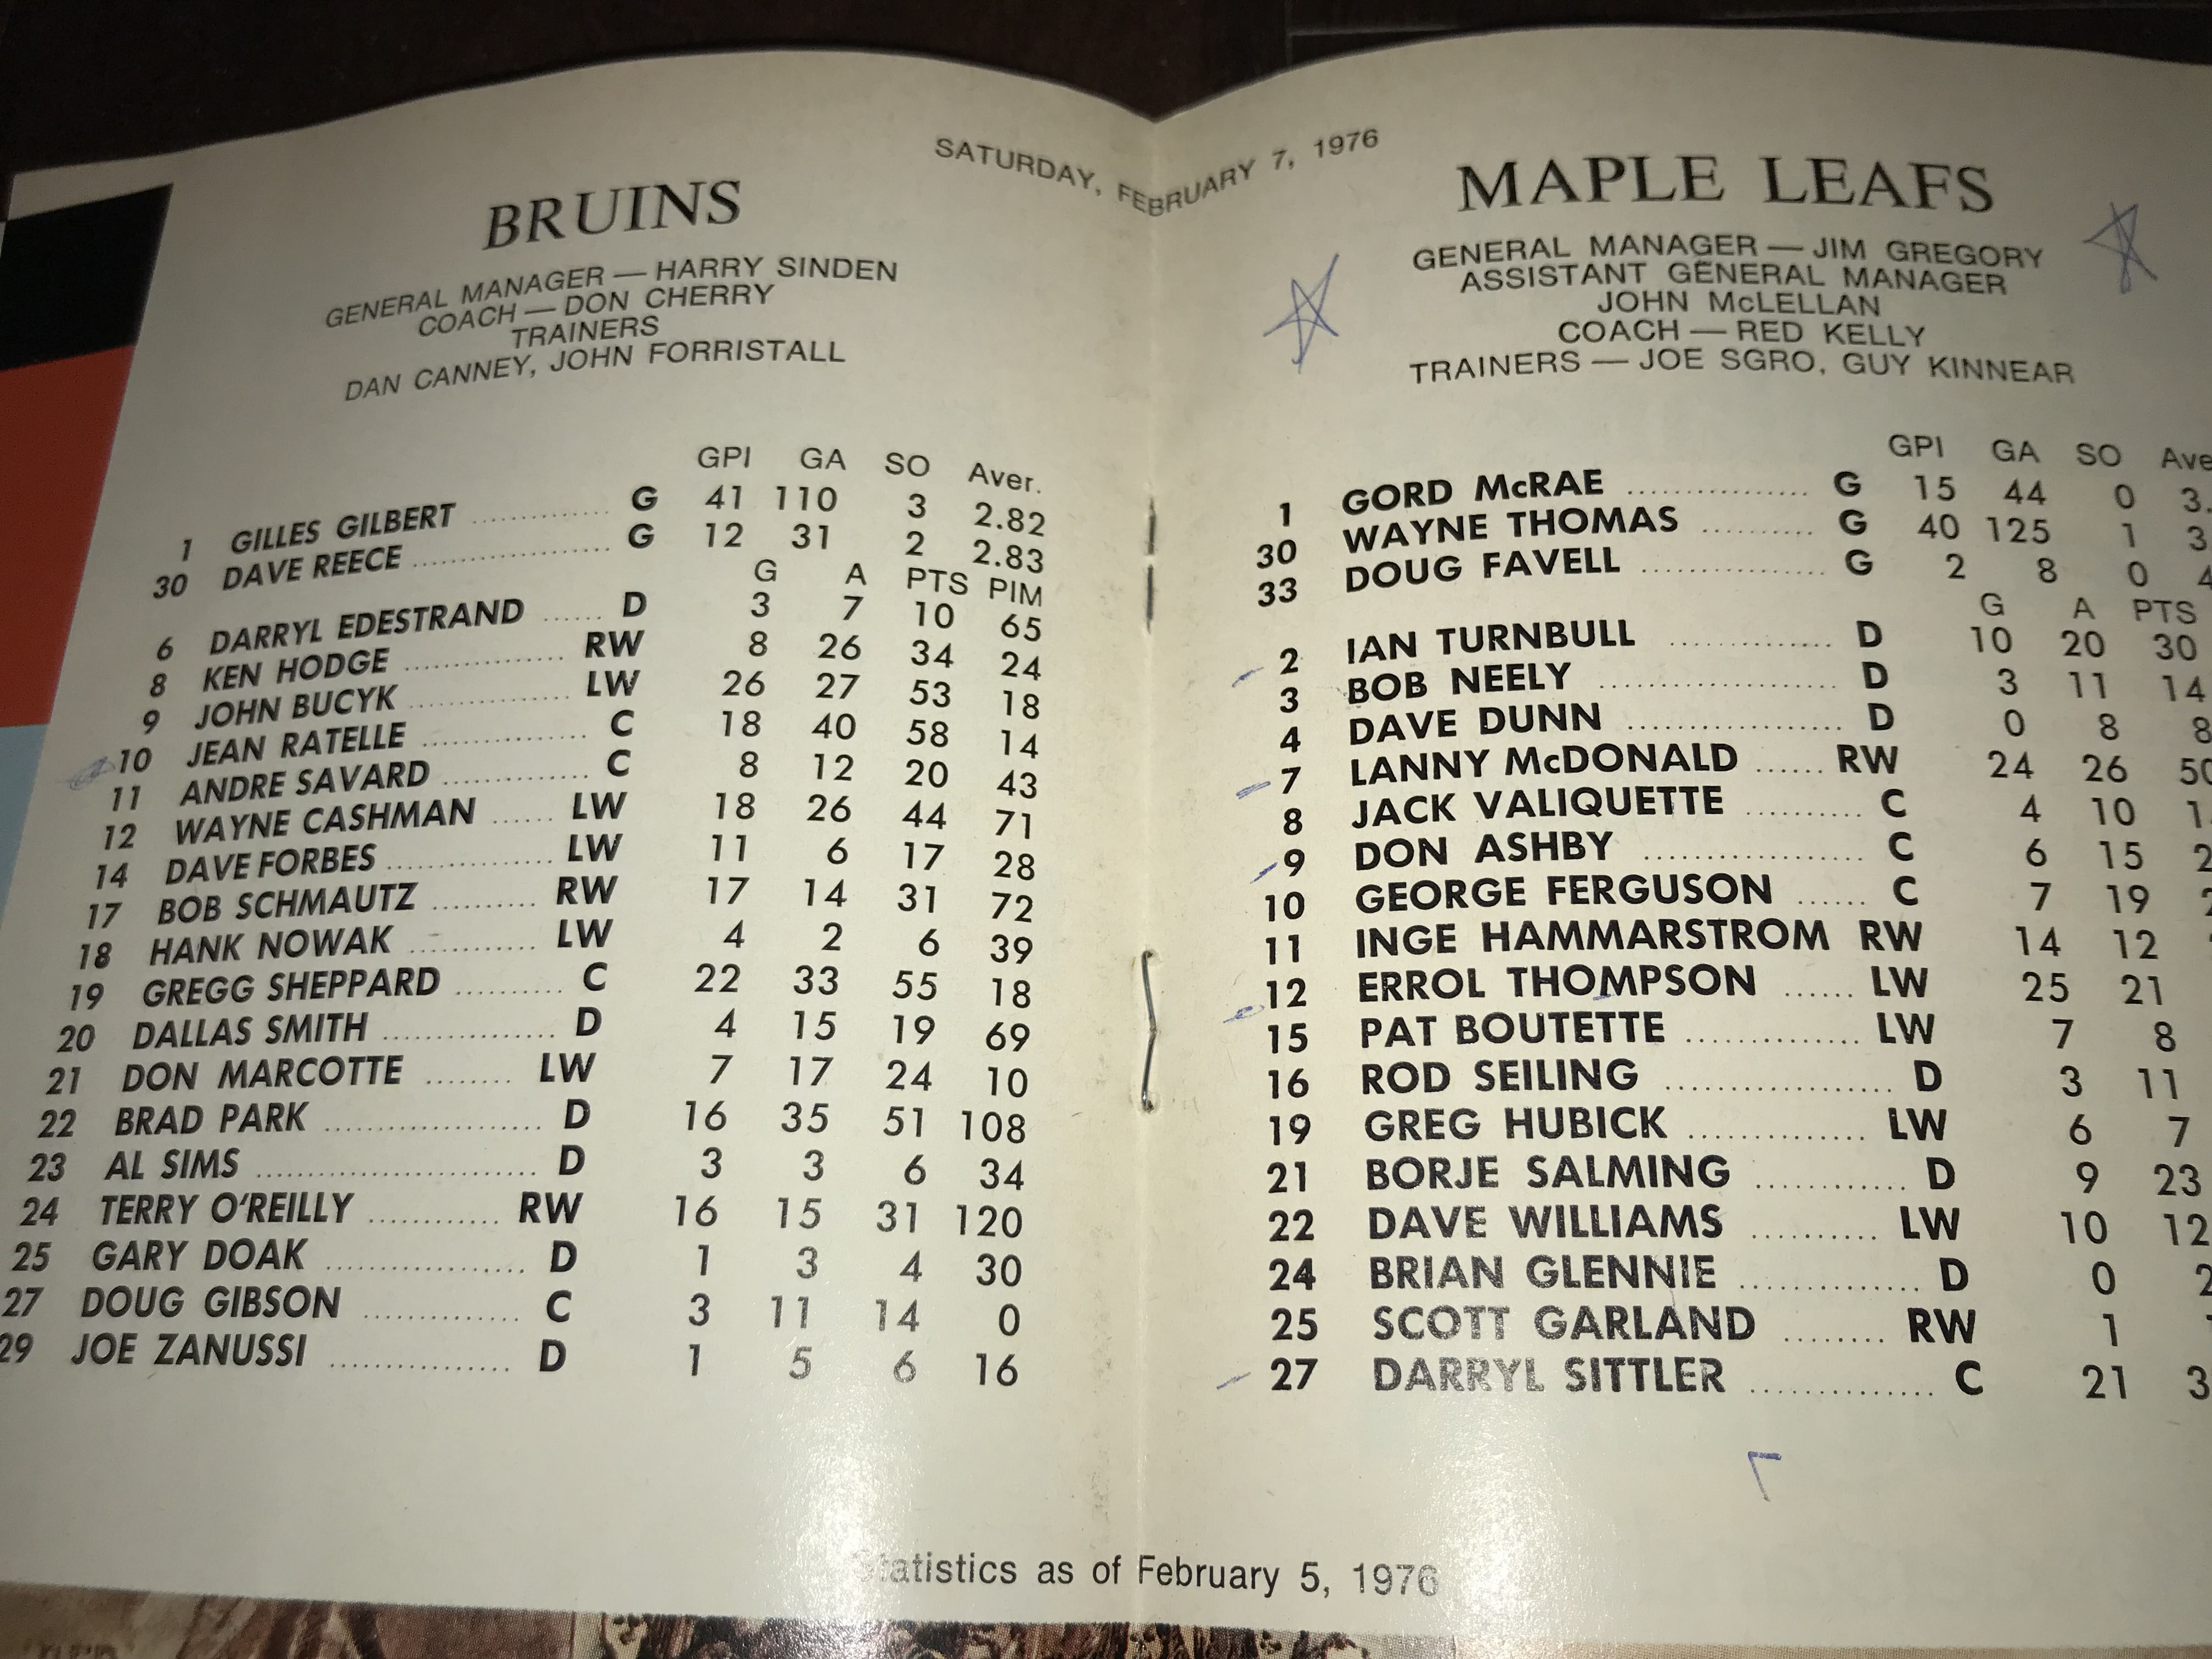 Darryl Sittler earning 10 points in historic game in 1976 